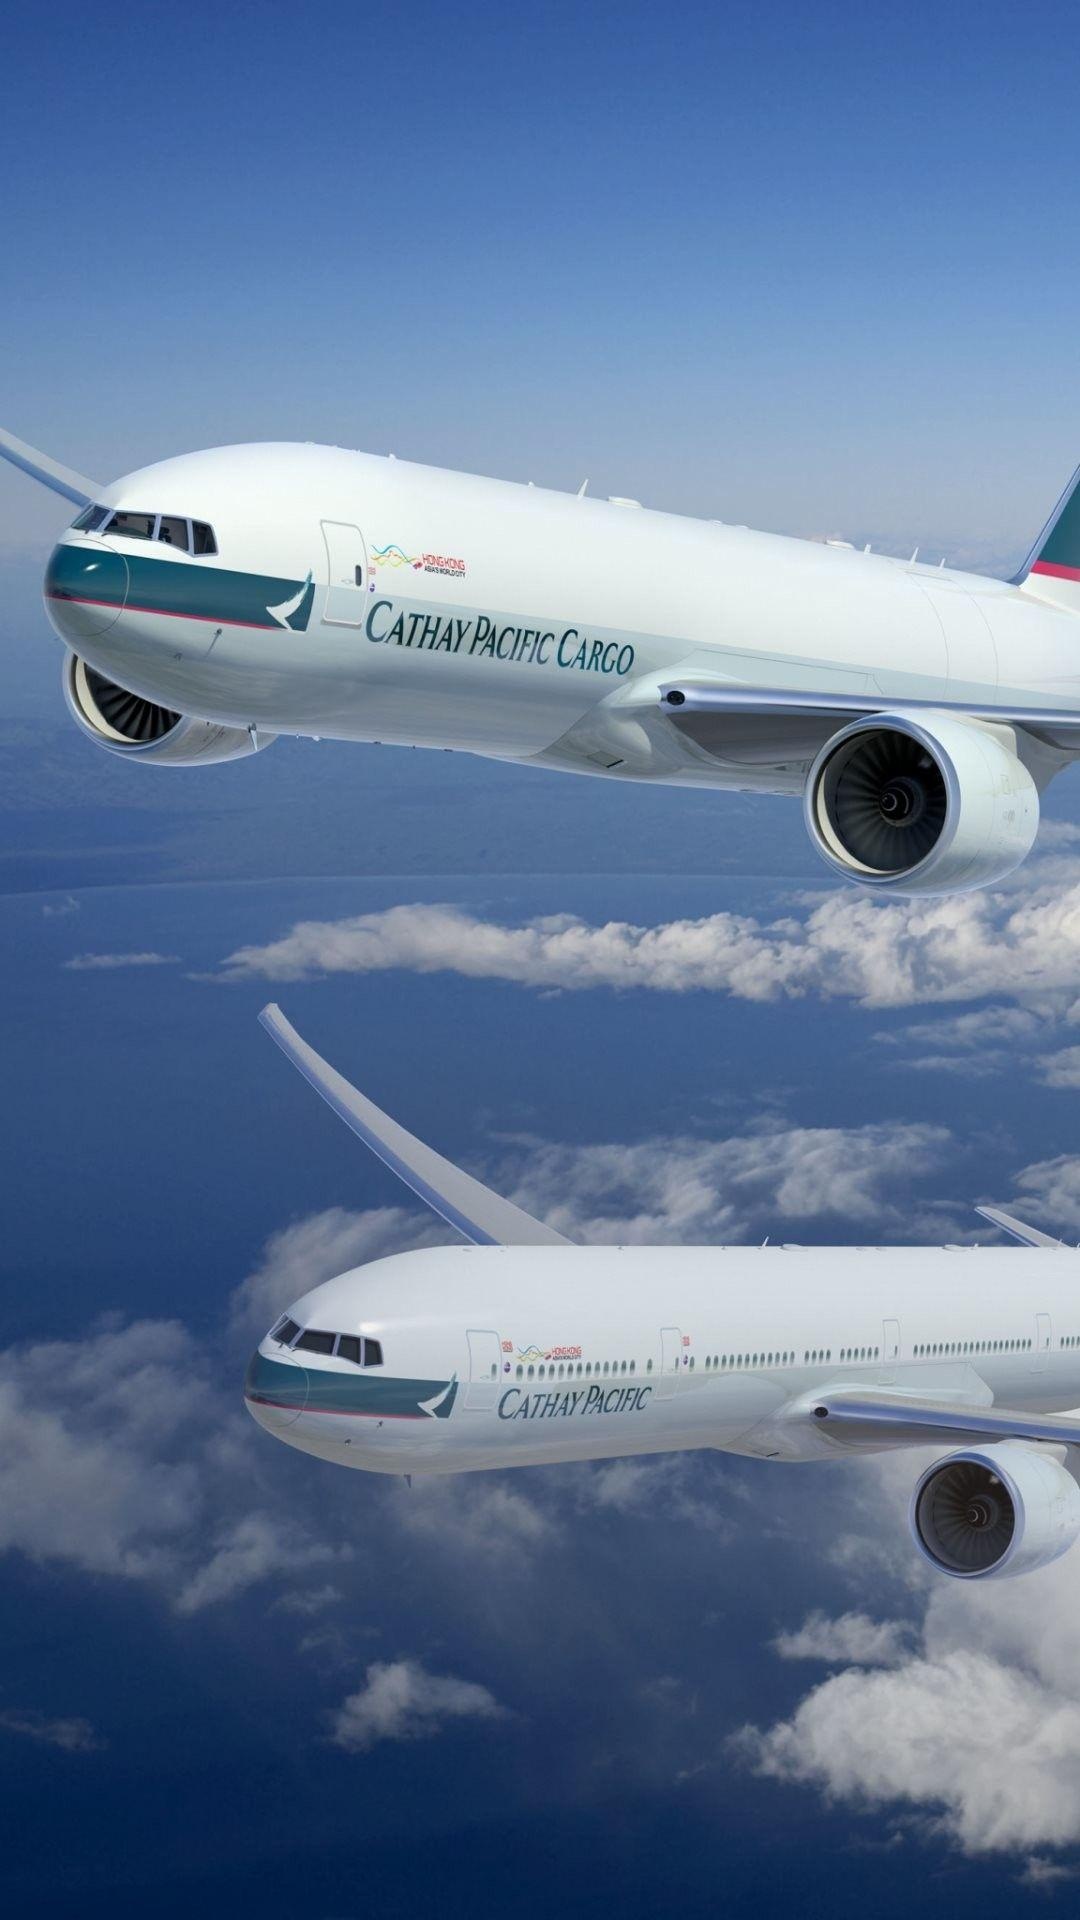 Cathay Pacific, Boeing 777 wallpapers, Stunning phone backgrounds, Flight elegance, 1080x1920 Full HD Handy